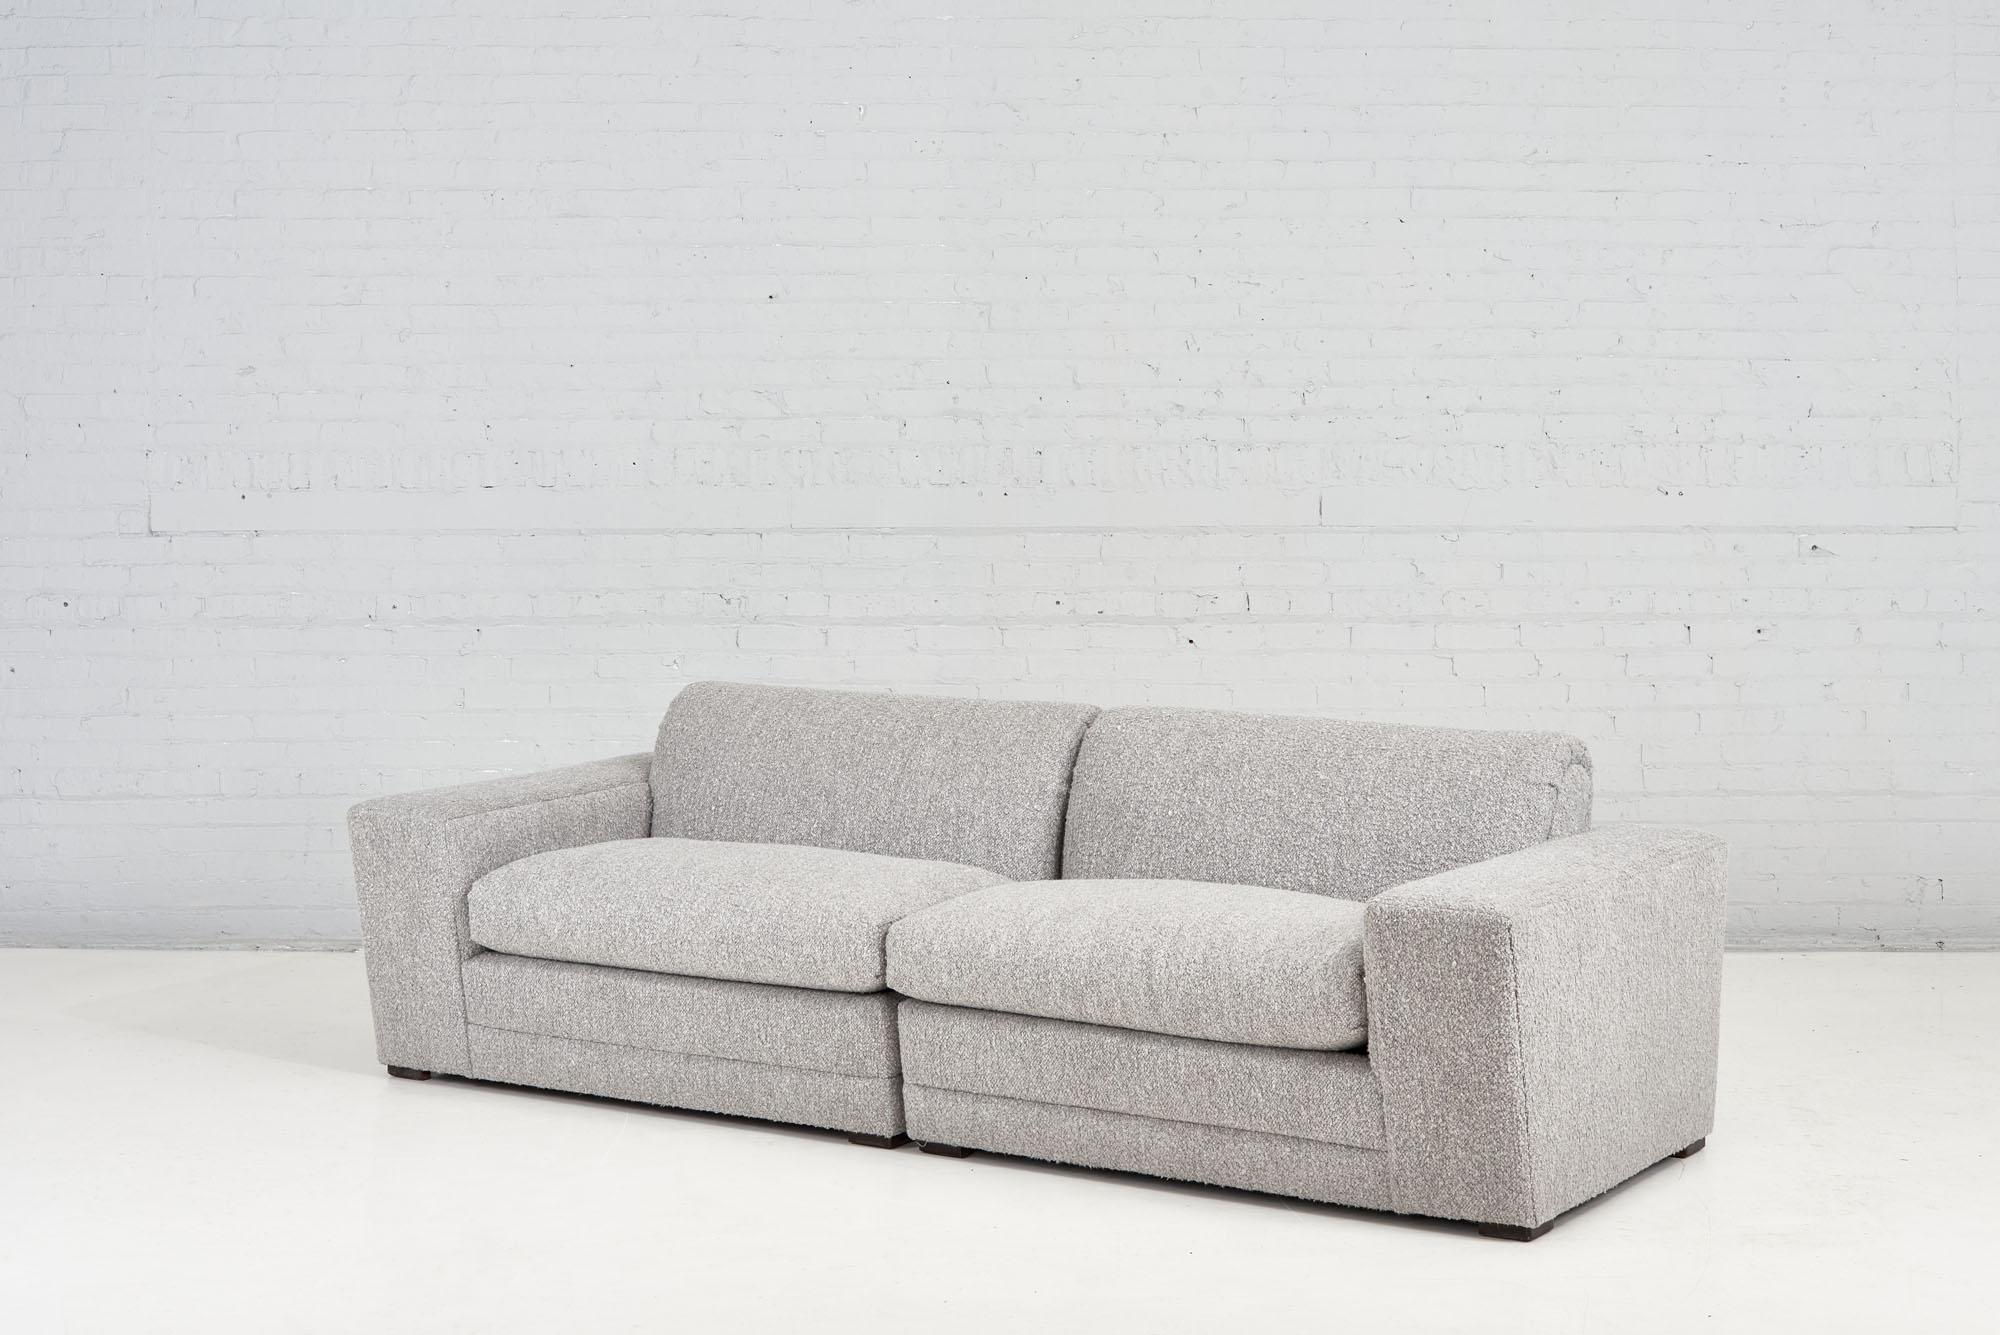 Paul Frankl Speed Sectional 2 piece sofa in Gray Boucle, 1932.